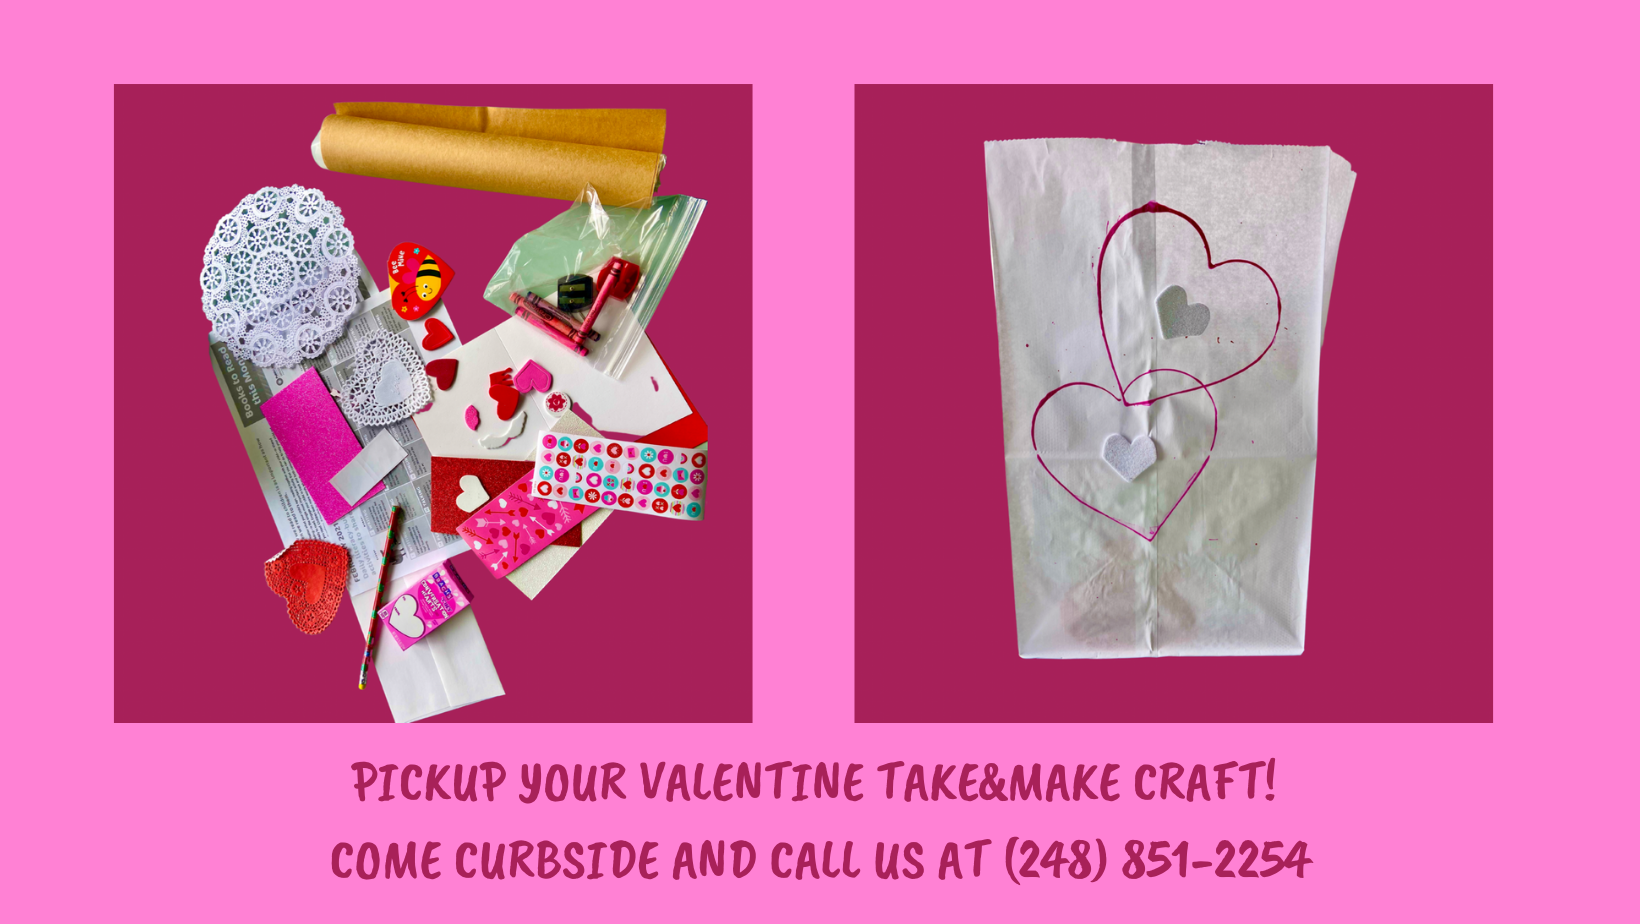 PICKUP YOUR VALENTINE TAKE&MAKE CRAFT! COME CURBSIDE AND CALL US AT (248) 851-2254.png